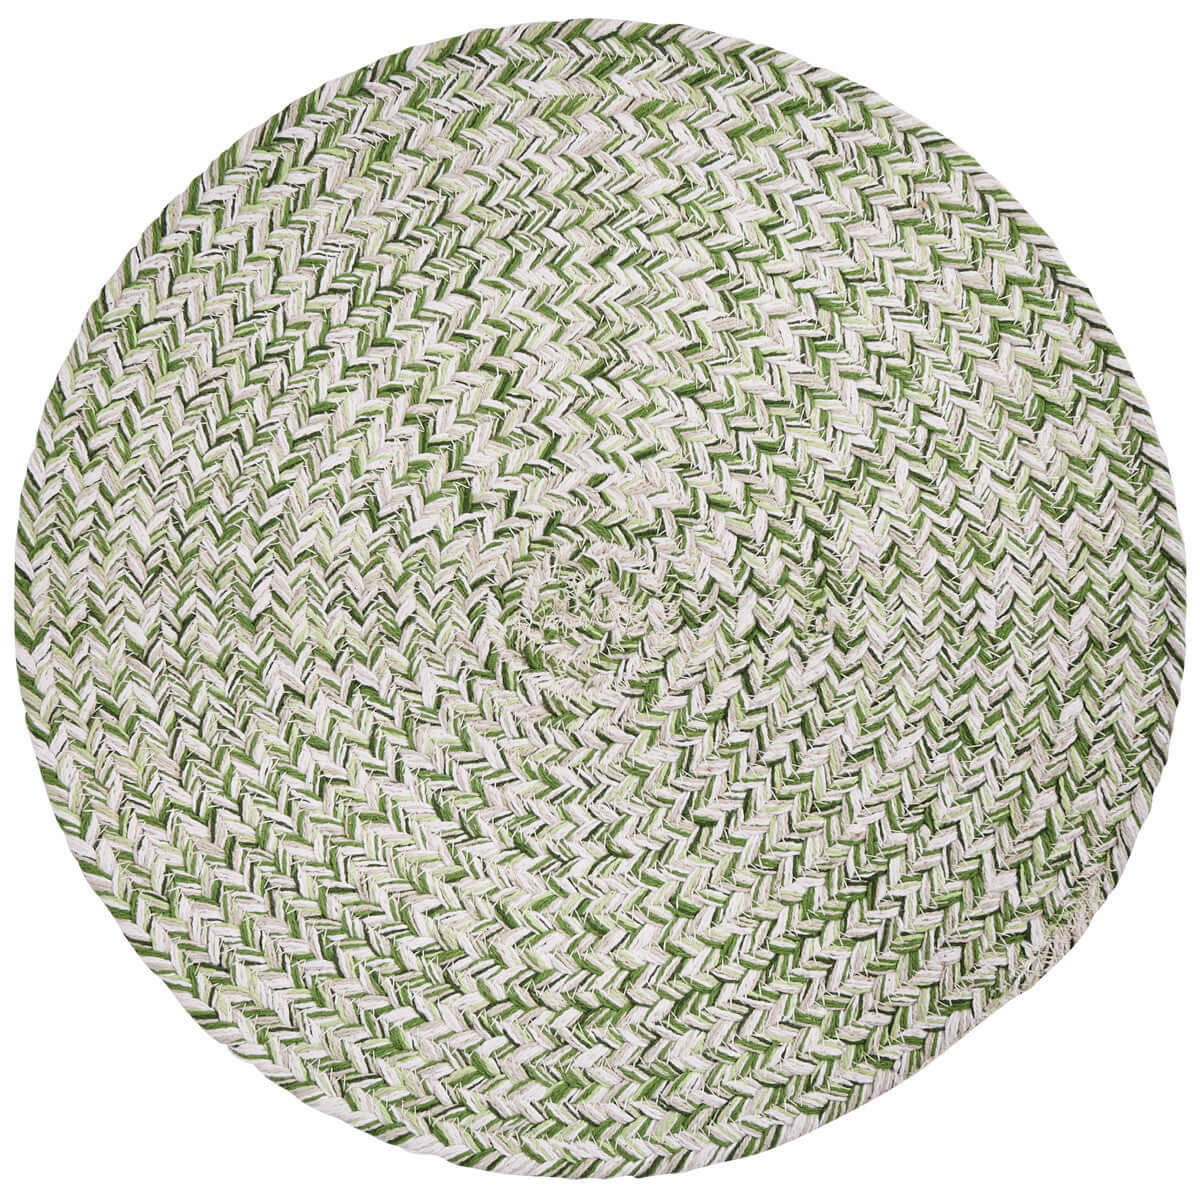 white background shows a round placemat woven in shades of green and white